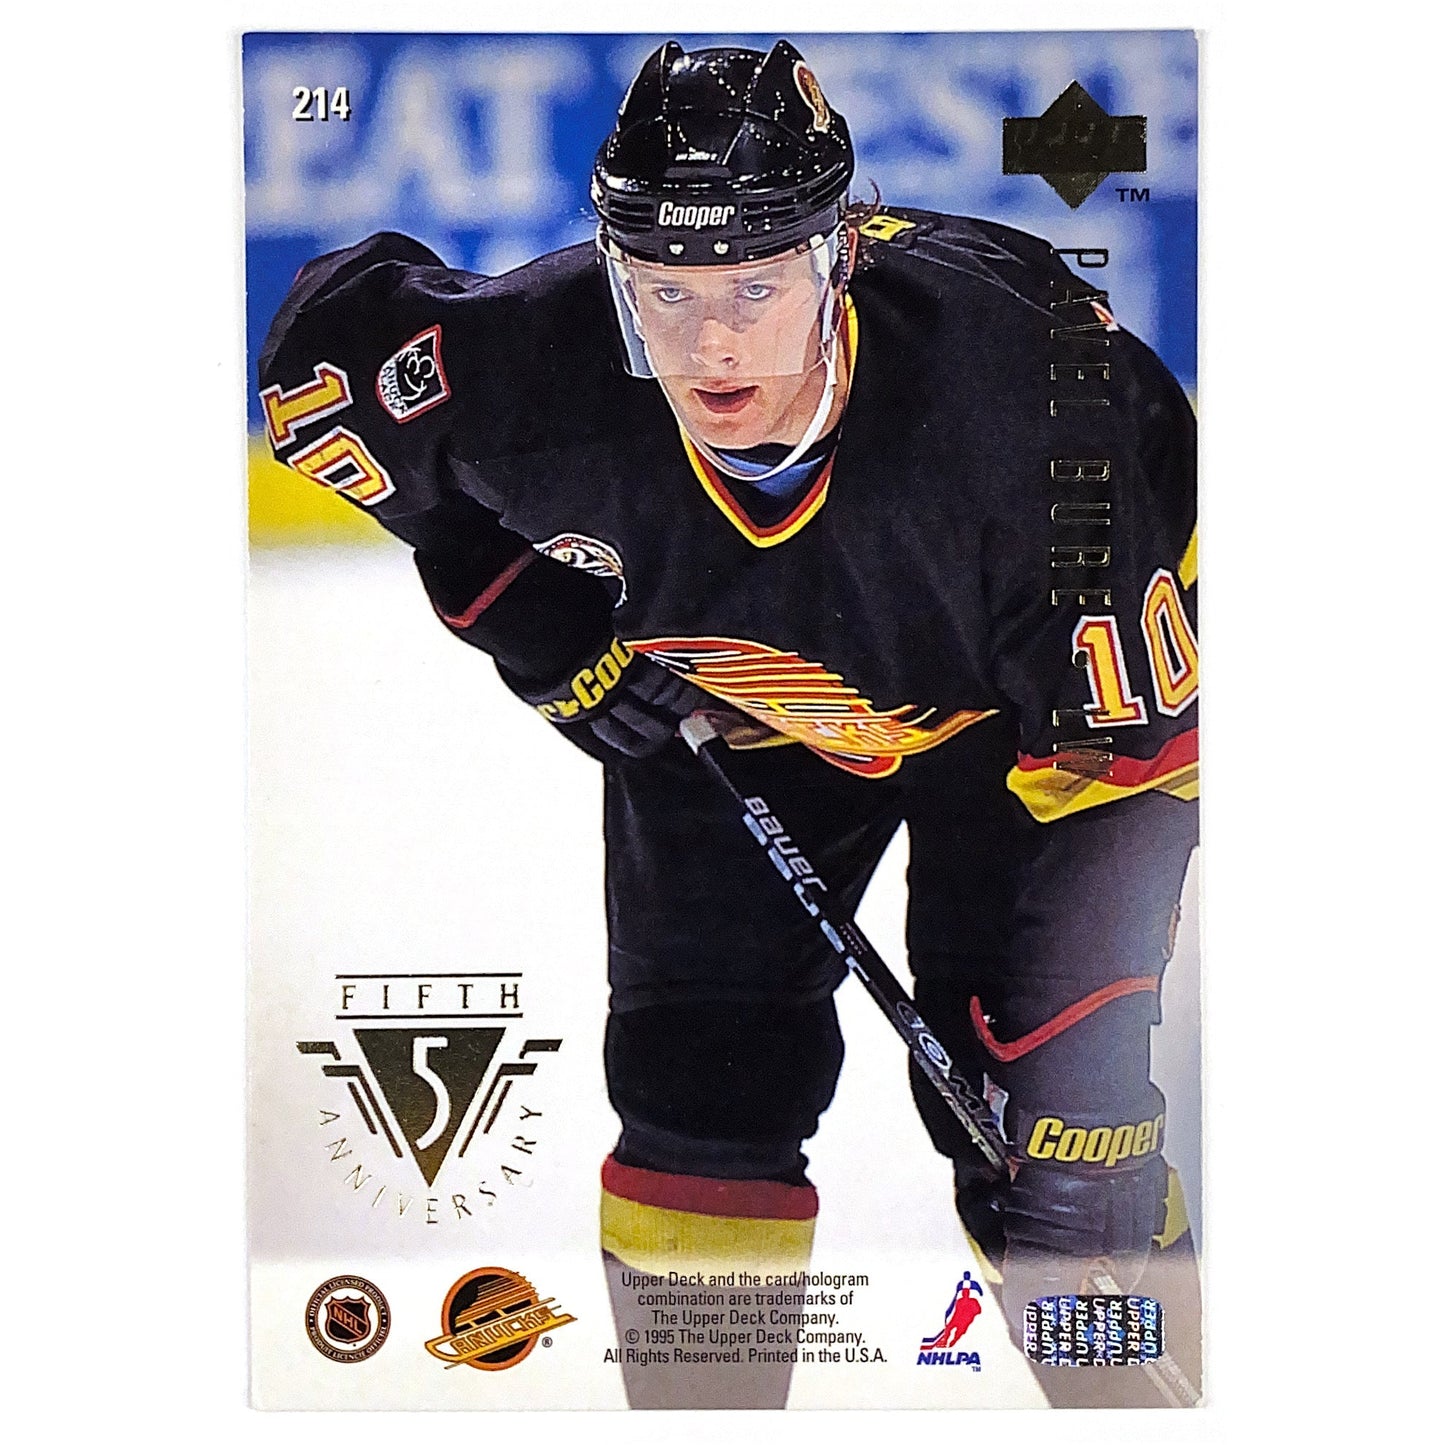 1995 Upper Deck Pavel Bure 5th Anniversary Young Guns Tribute